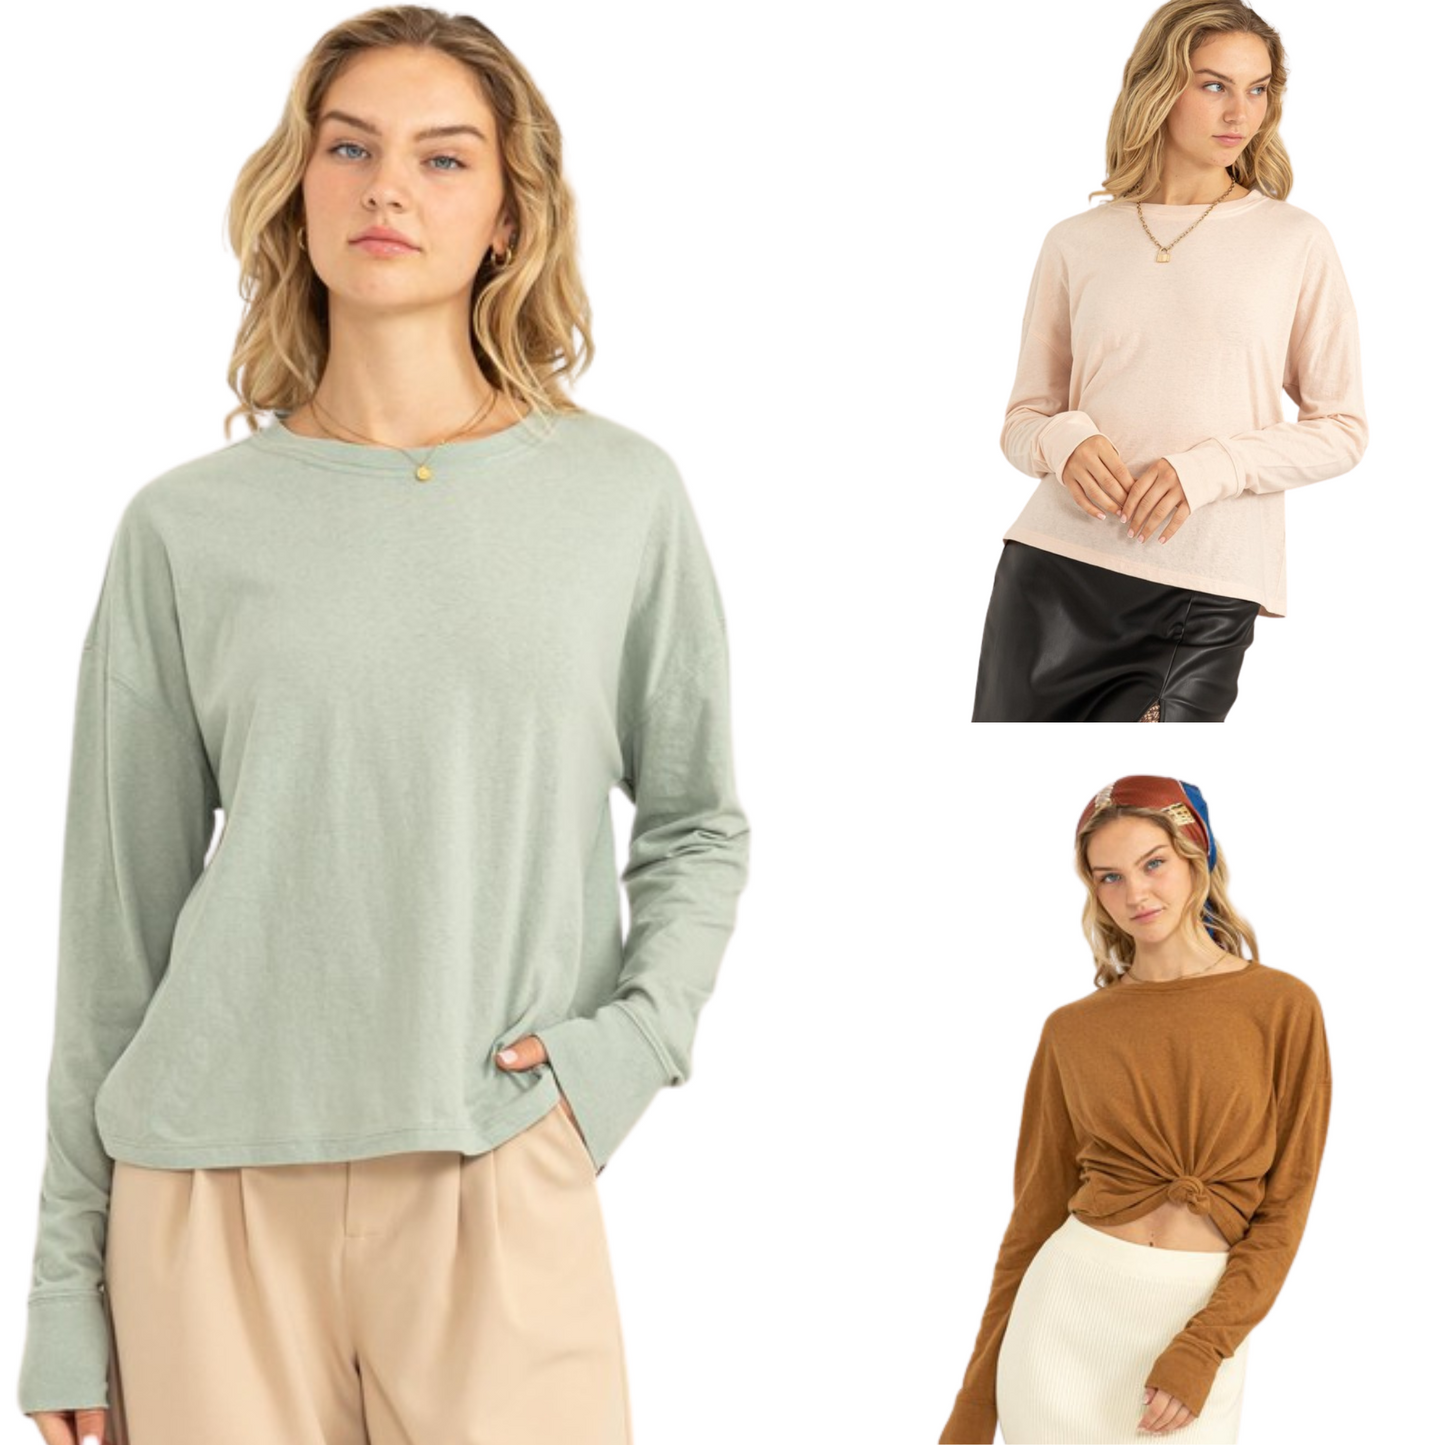 Introducing the Girl Next Door Oversized Tee, perfect for any occasion. Crafted with a round neckline, drop shoulders, and long sleeves, this T-shirt provides a relaxed fit and comfortable wear. Available in trendy dusty pink, iceberg green, and pale brown colors, this top is a must-have for any fashionista's closet.